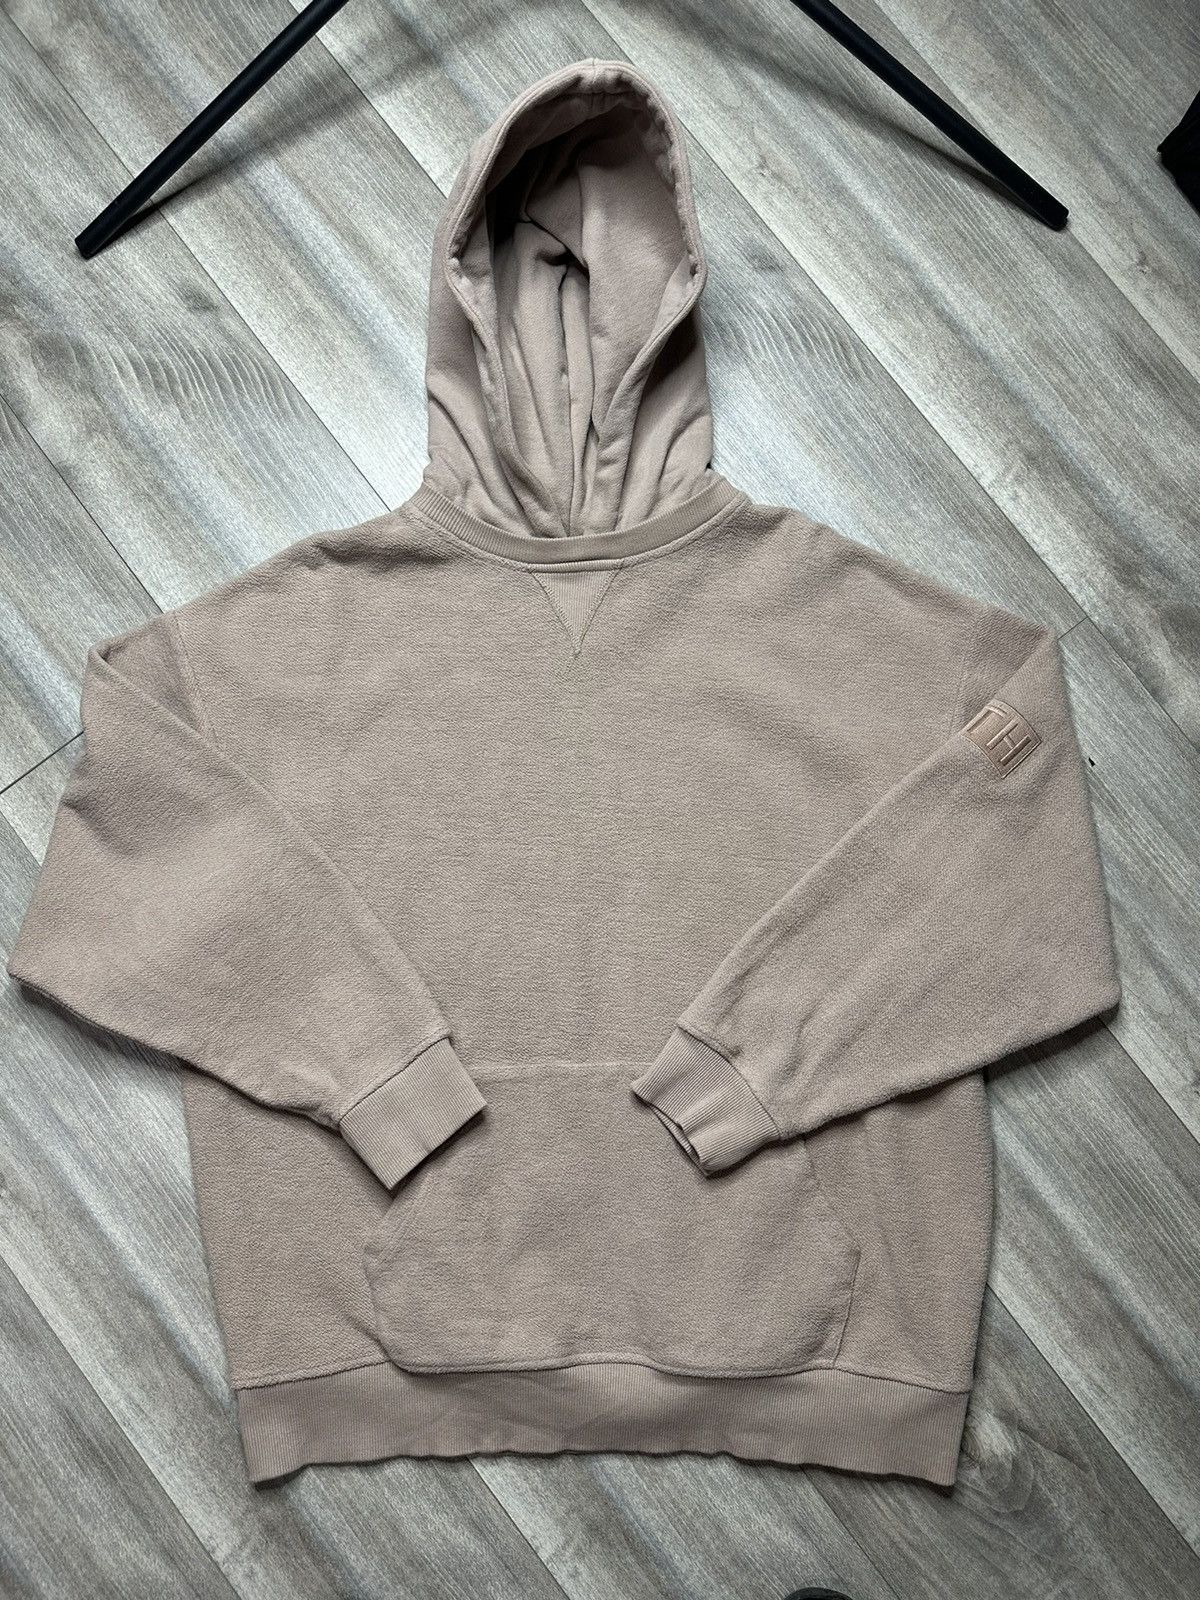 Kith KITH REVERSE WILLIAMS 2 HOODIE- CINDER Size Large | Grailed